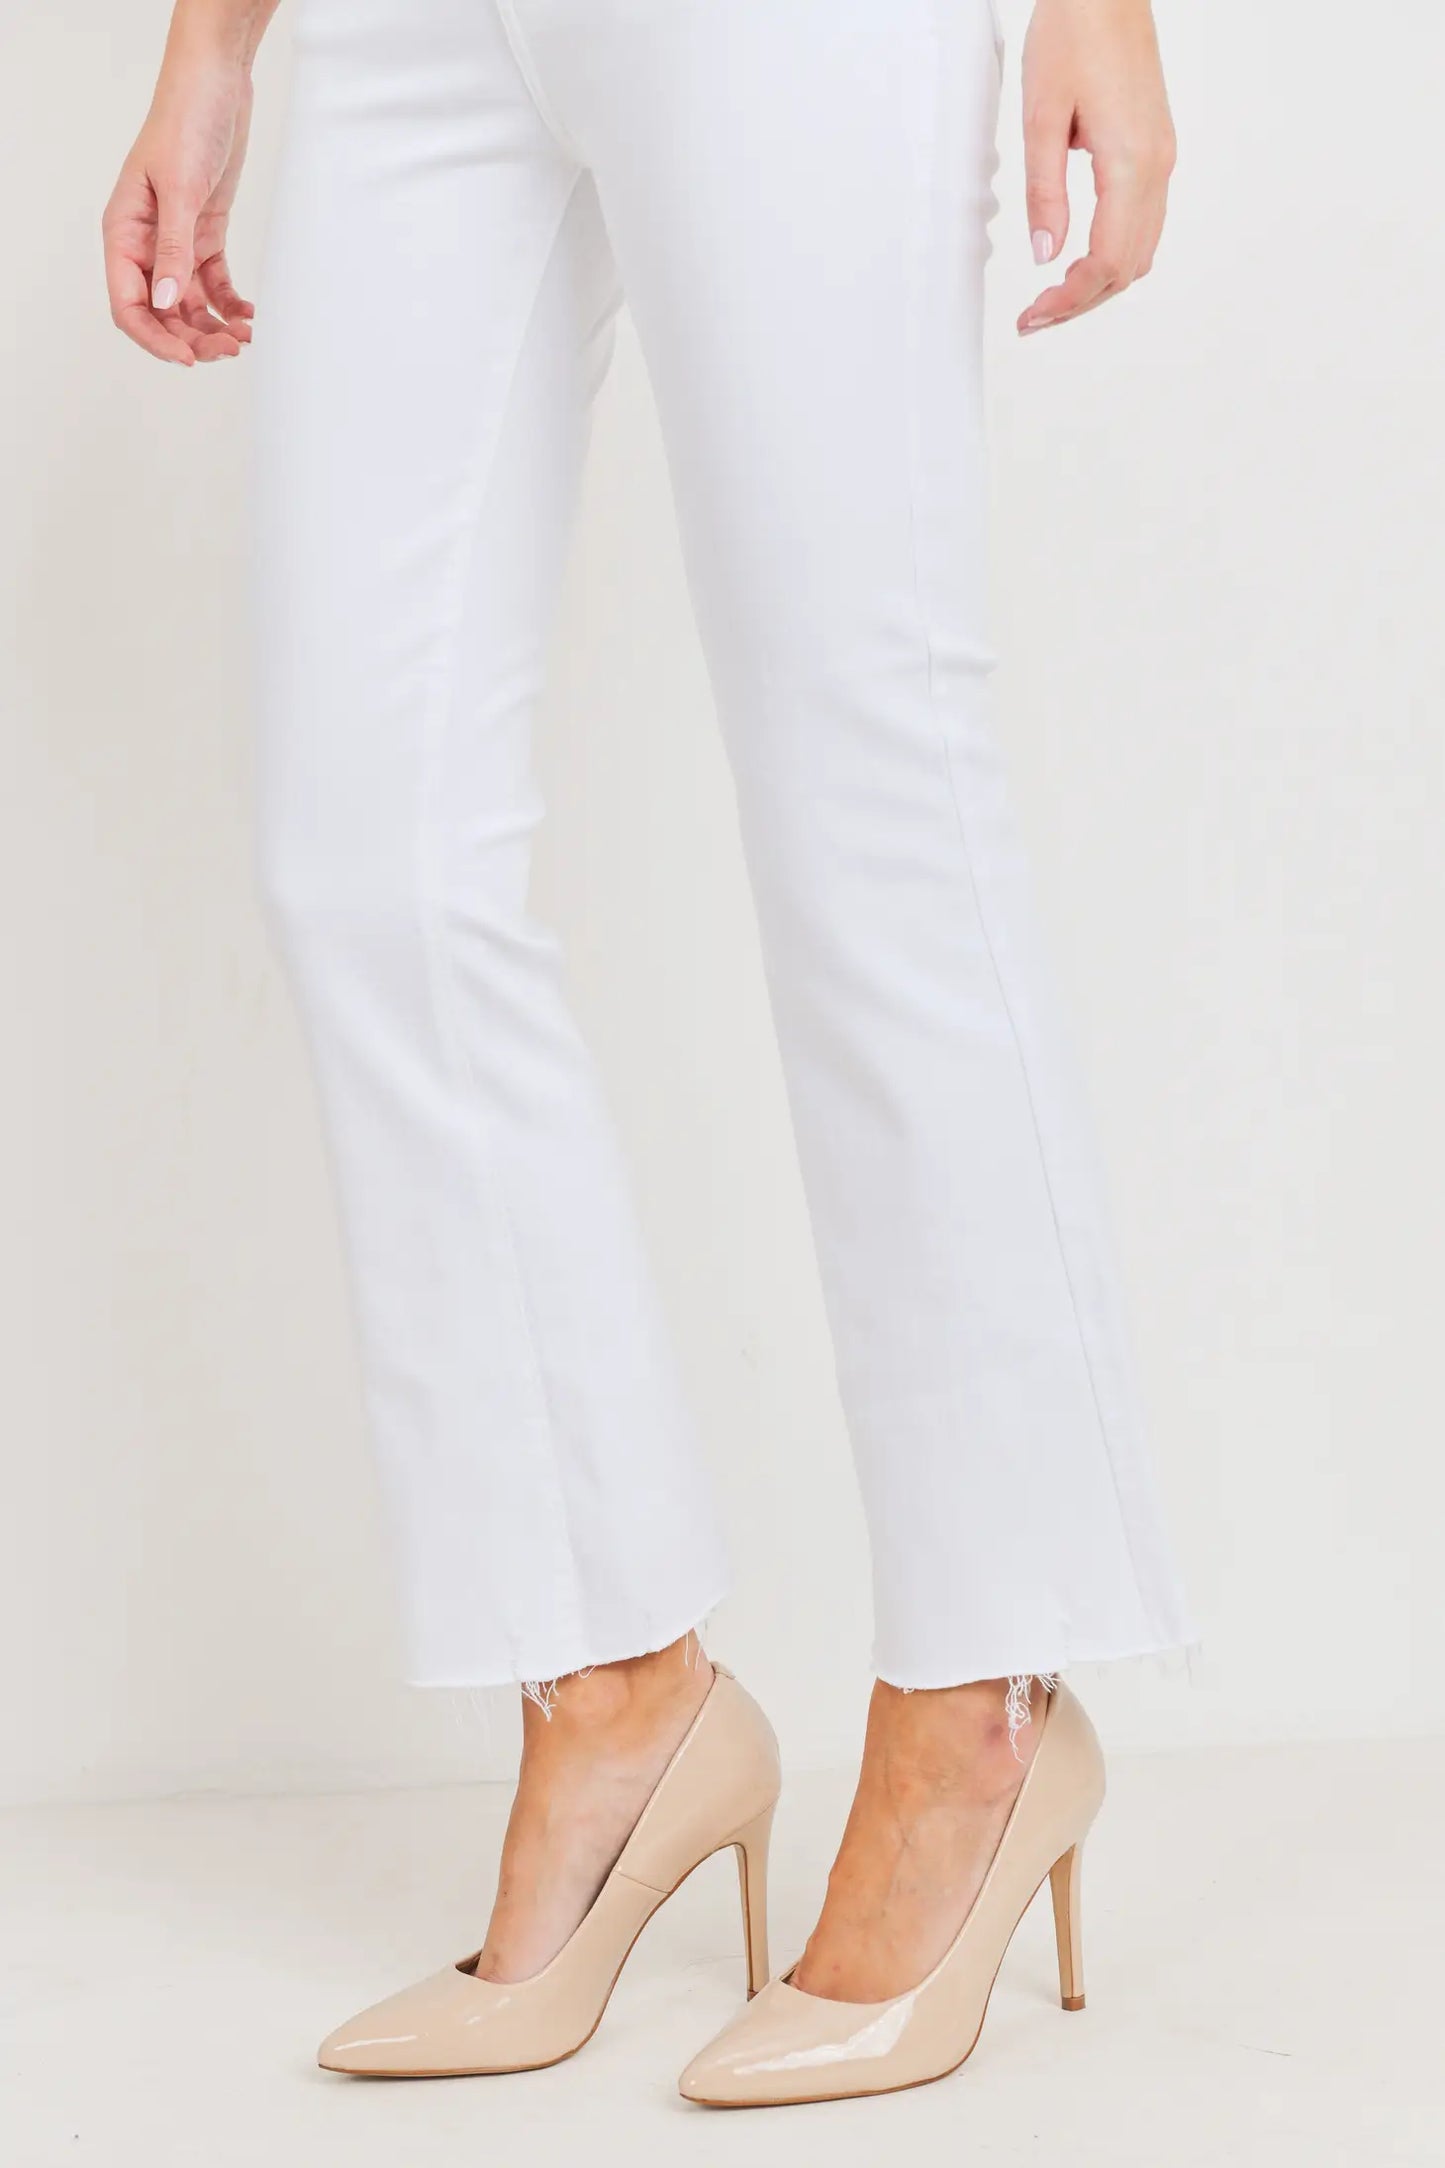 High Rise Crop Flare White Jeans